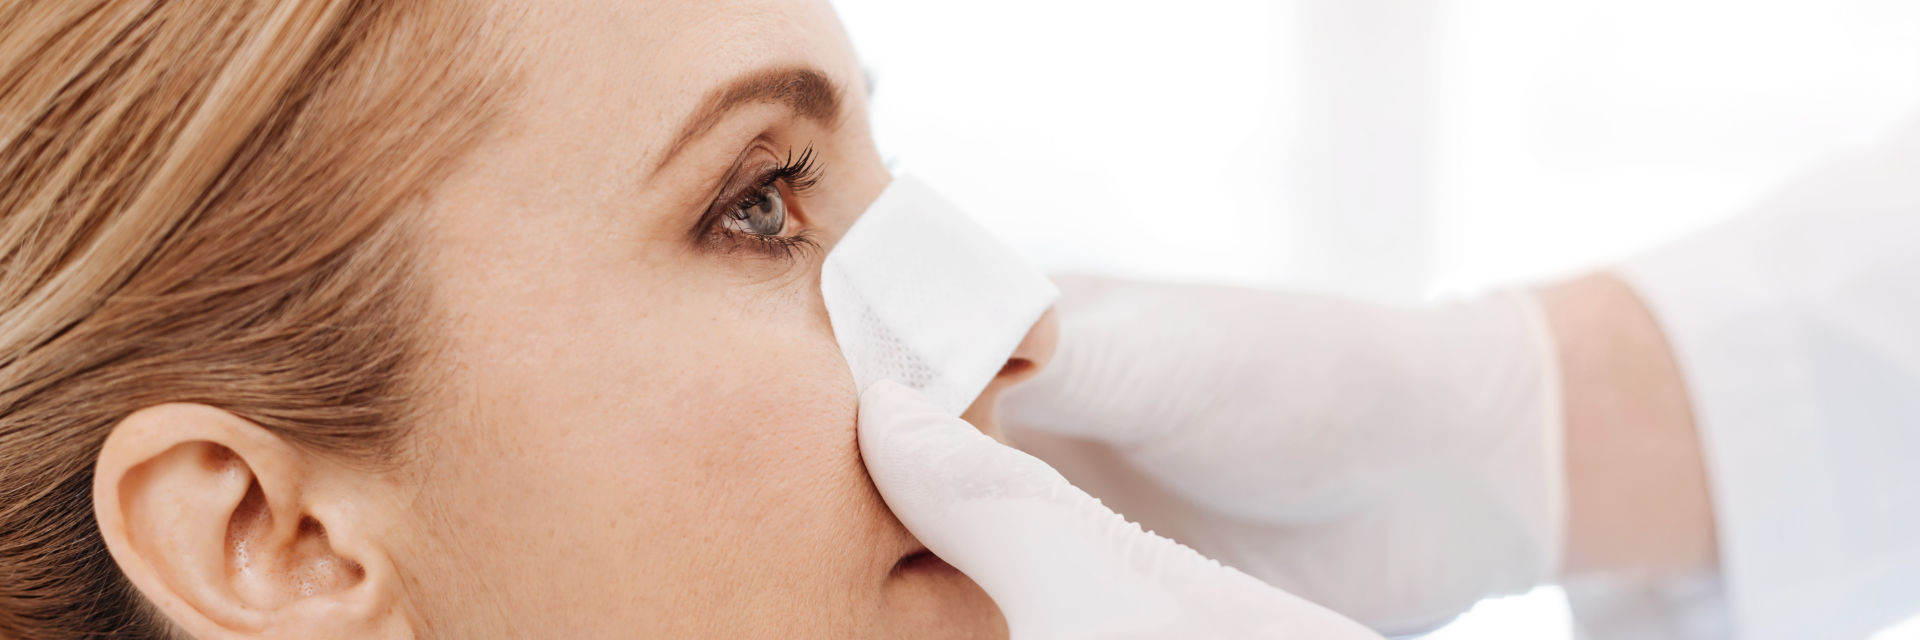 A doctor applying protective dressing on nose of a woman after nose procedure.